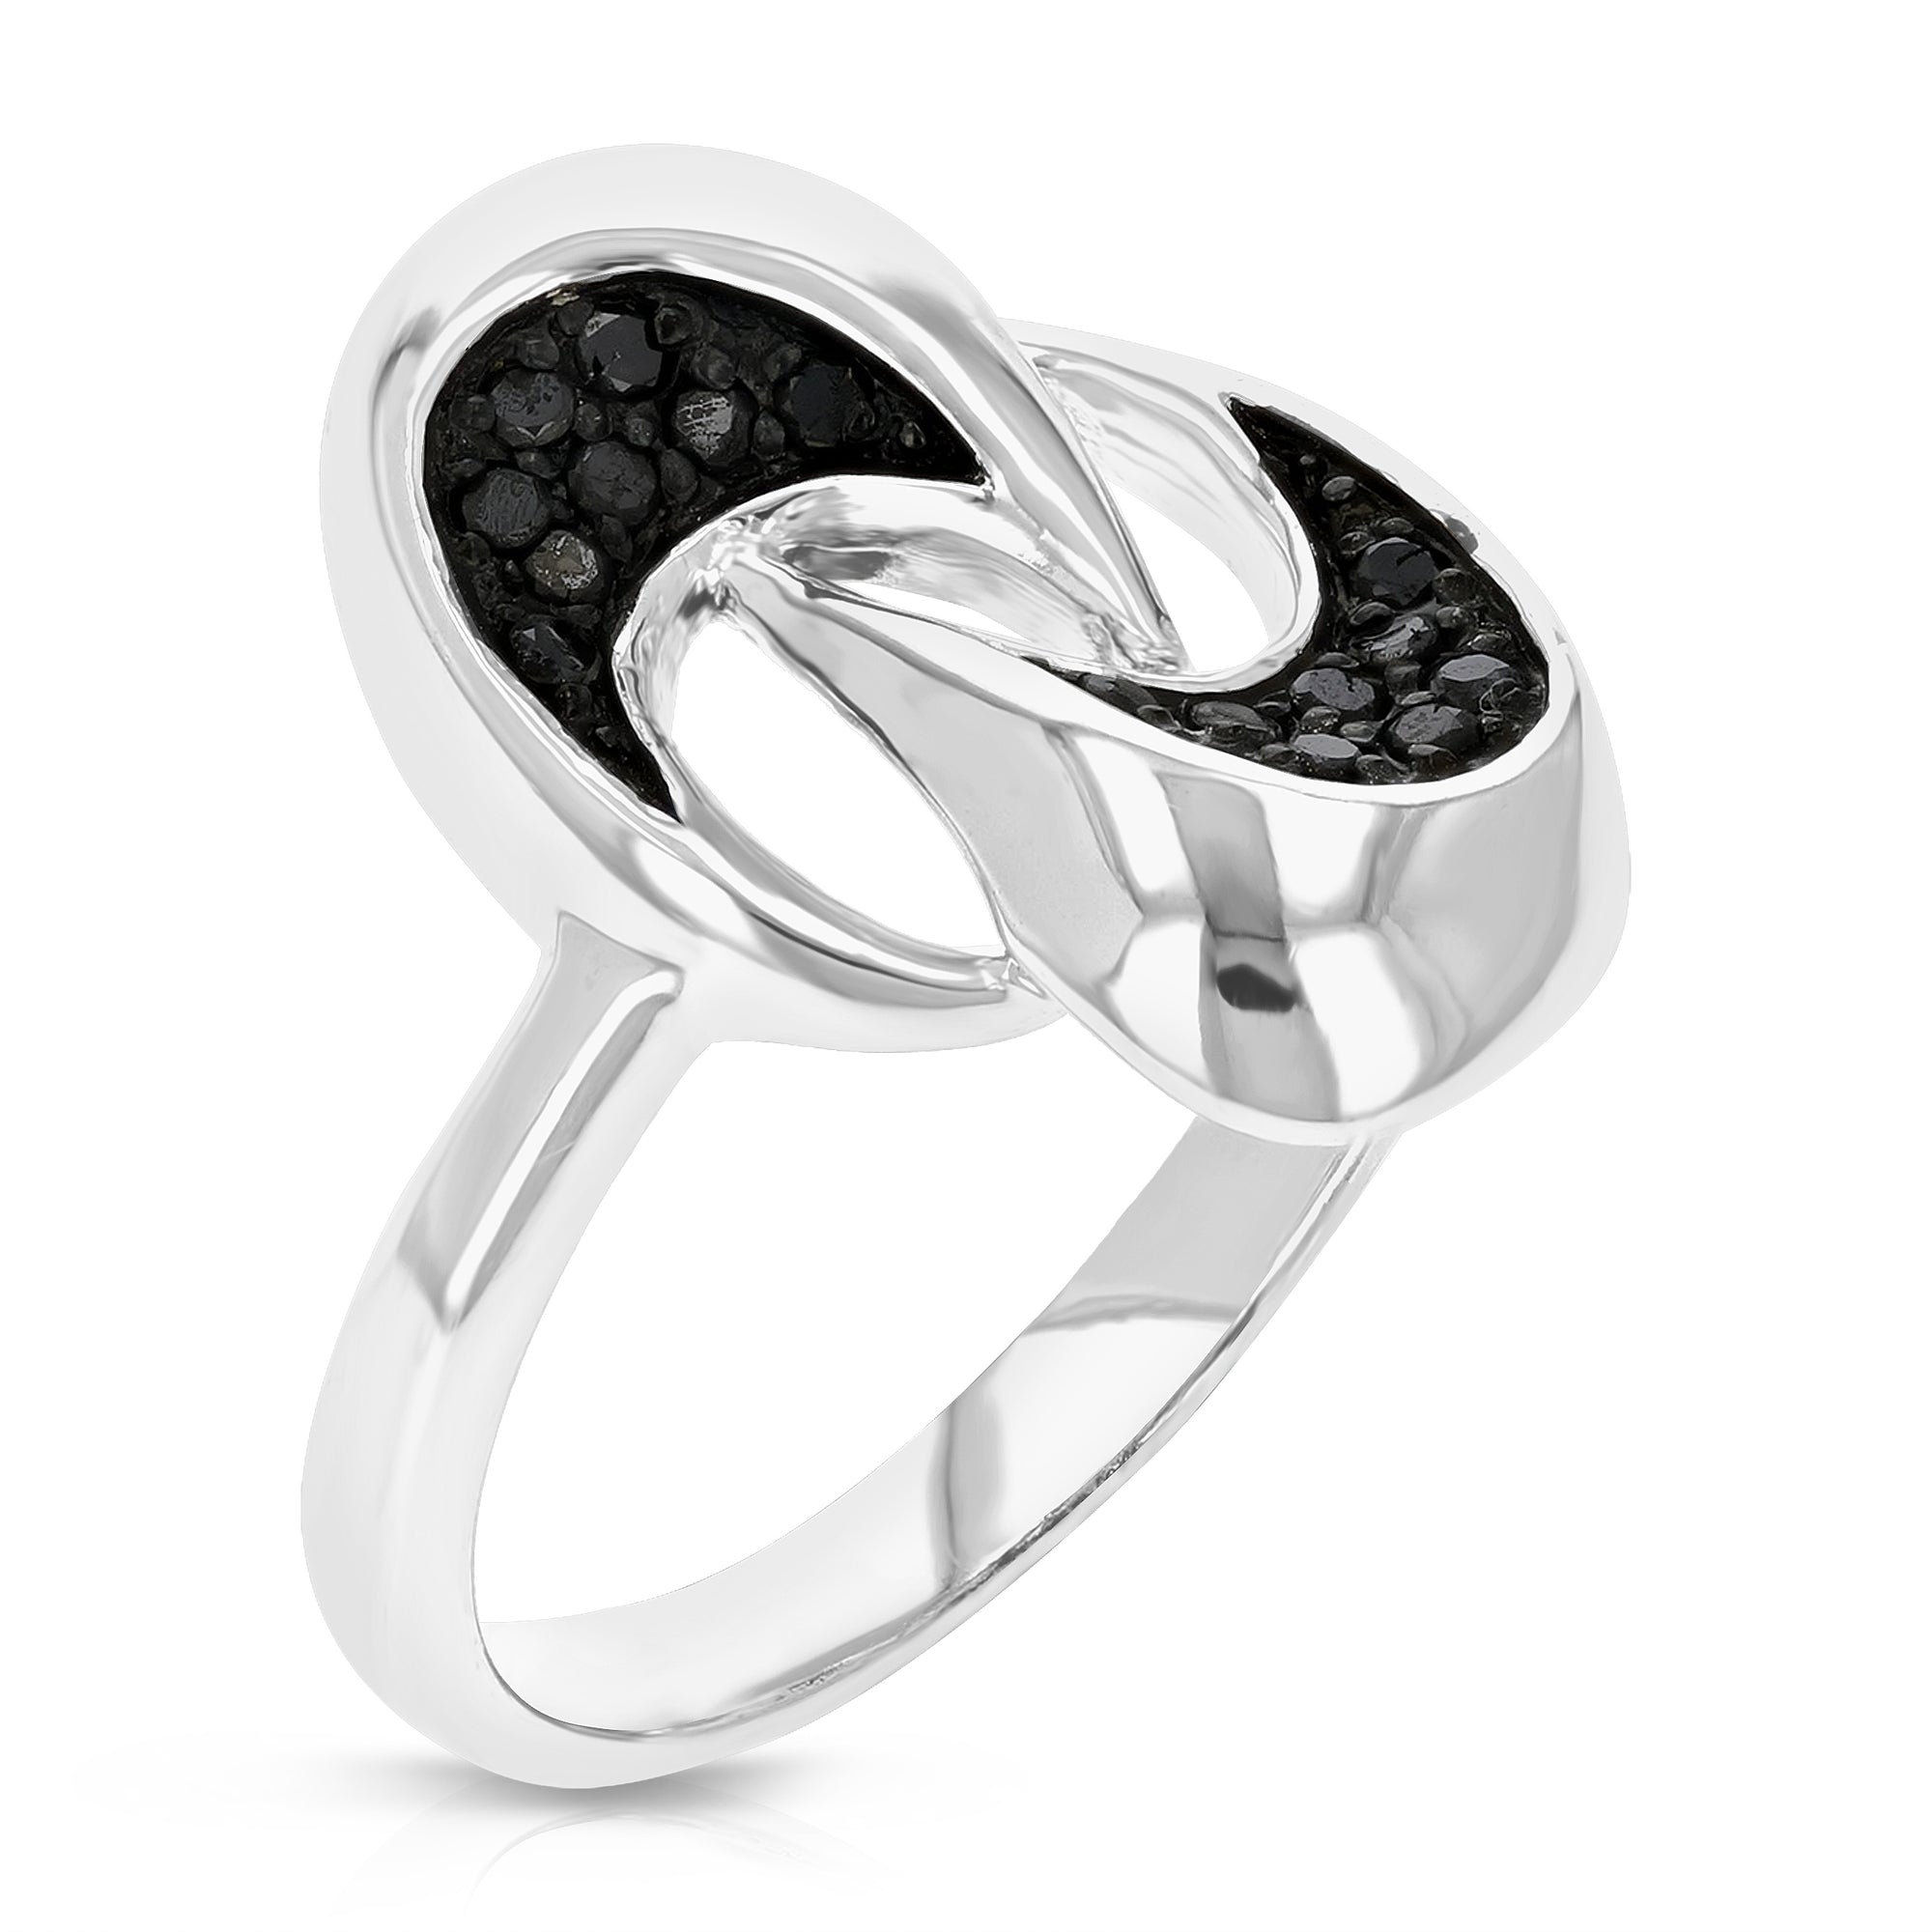 Sterling Silver Black Diamond Ring (0.15 cttw) Size 7